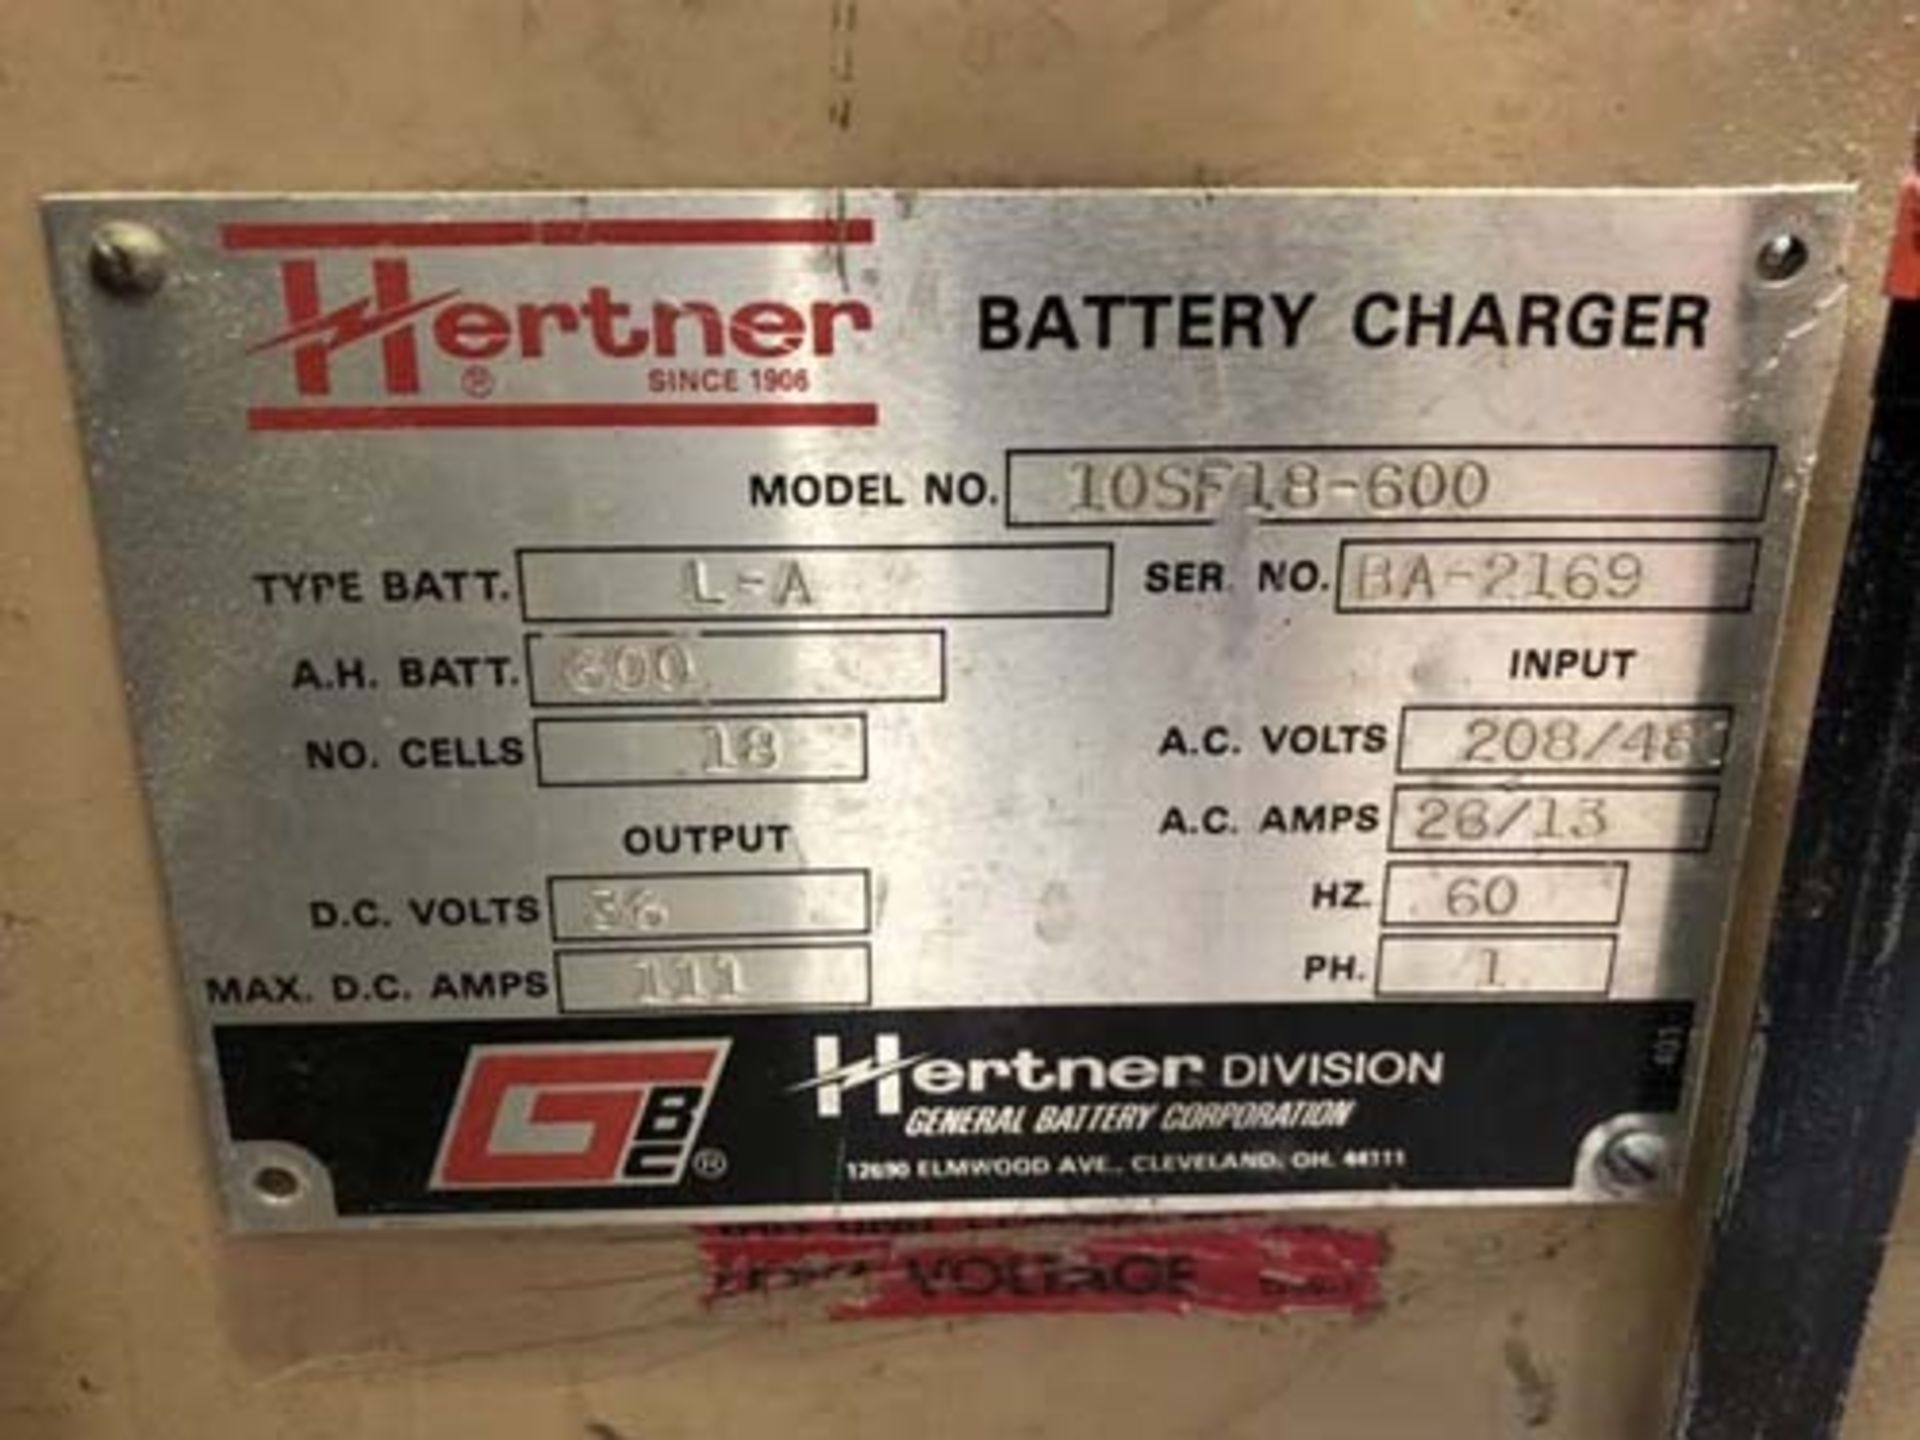 Hertner Battery Charger, 36 Volt, Mdl: 10SF18-600, S/N: BA-2169, Located In: Huntington Park, CA - Image 2 of 2